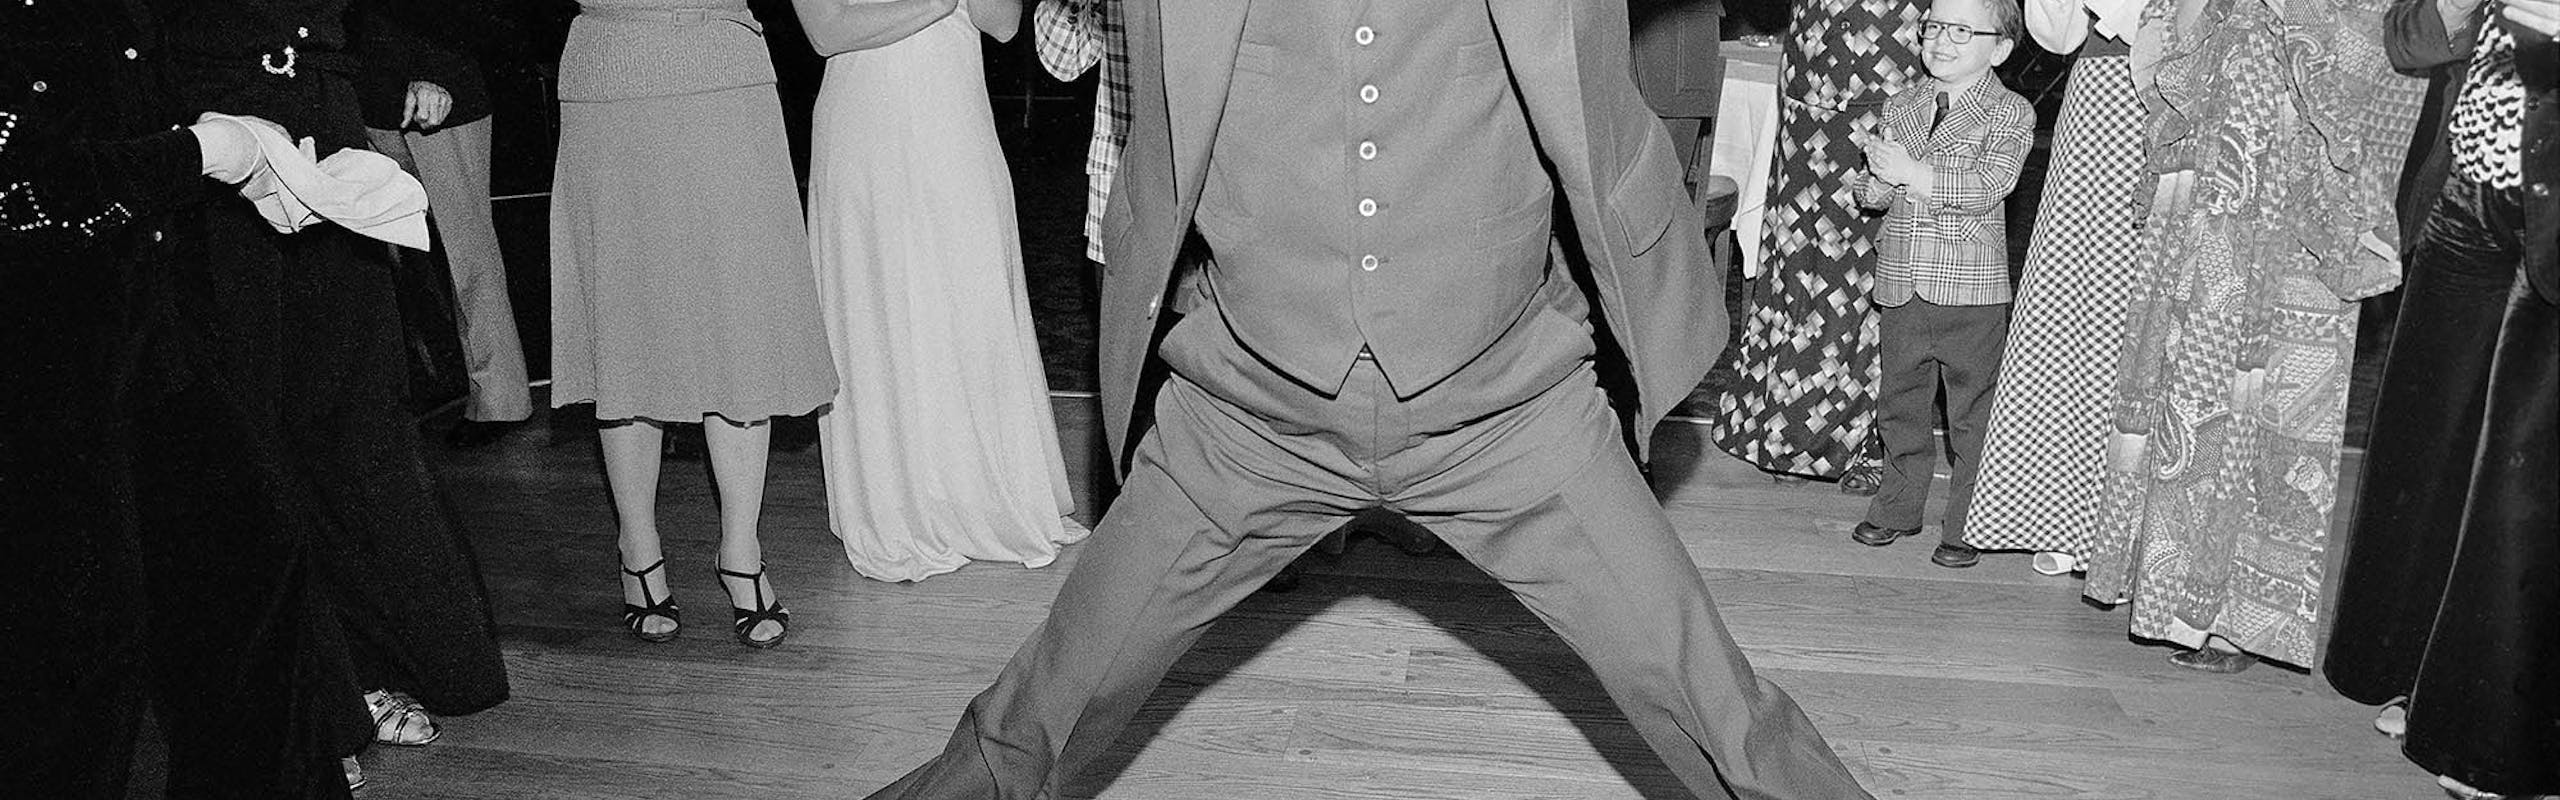 Man in a 3 Piece Suit Dancing Within the Circle at a Wedding, Rockille Centre, NY, 1976. © Meryl Meisler / Courtesy Polka Galerie.